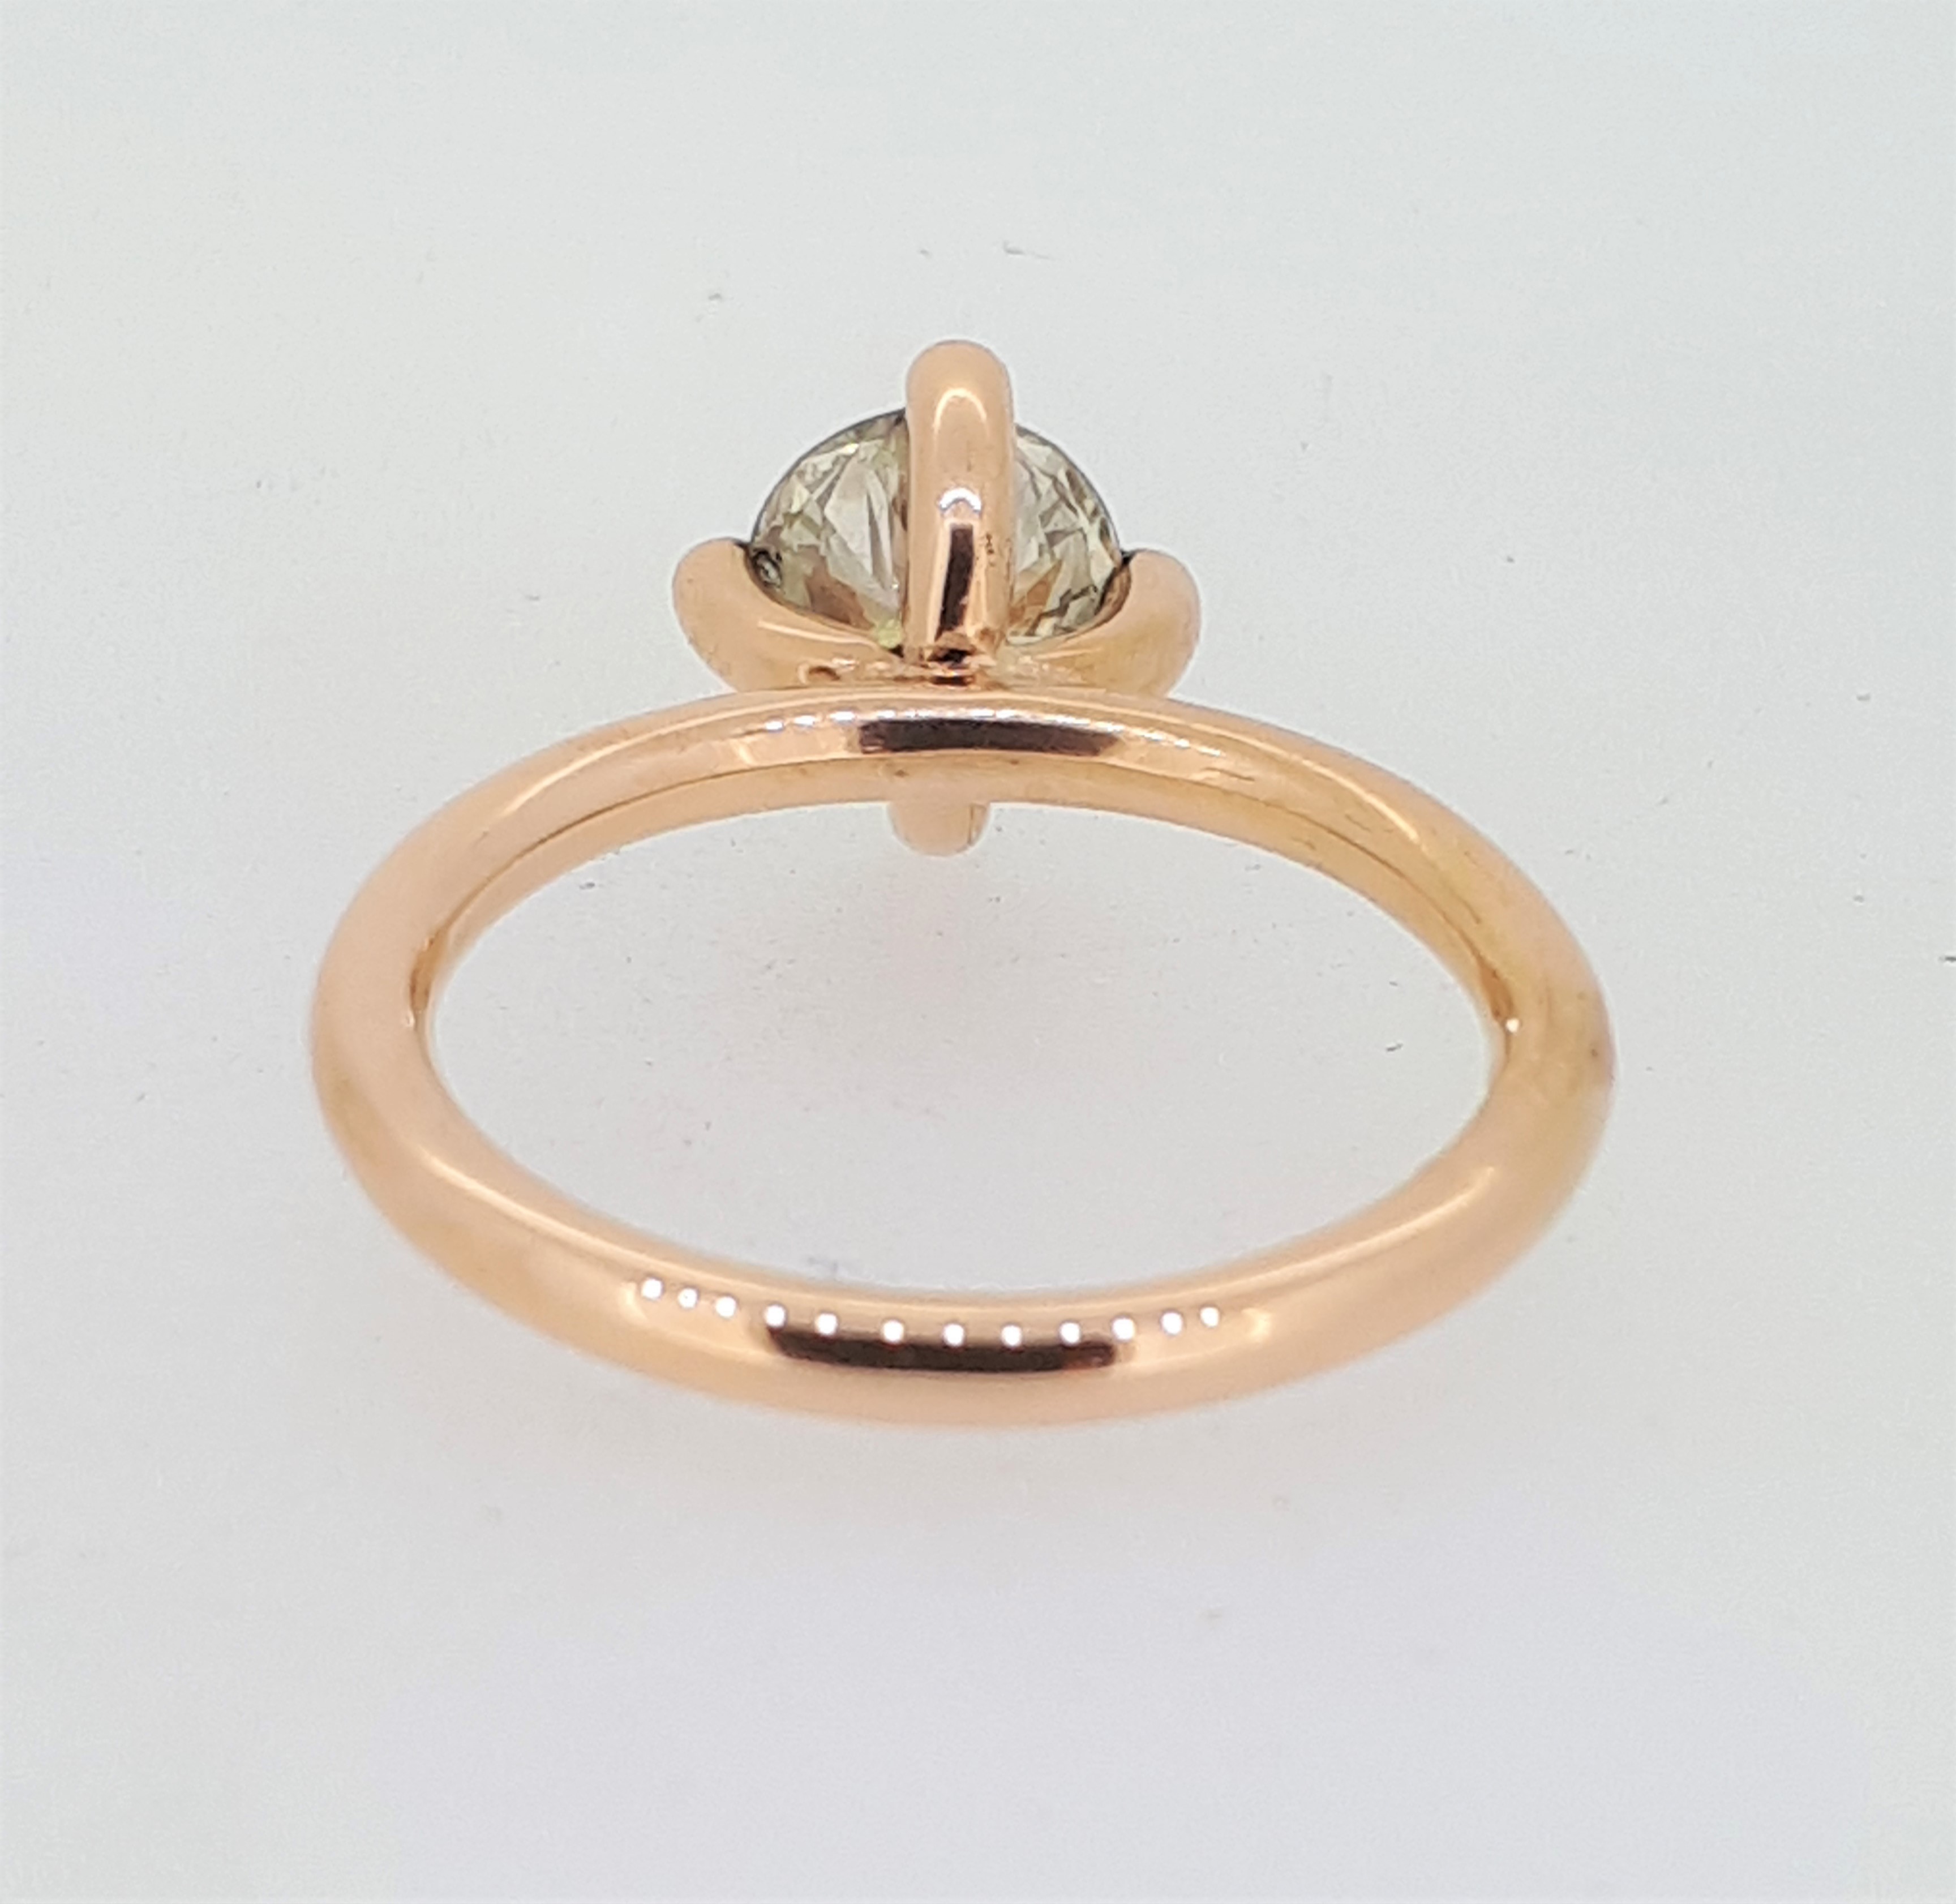 Handmade 18ct (750) Rose Gold +1ct Cognac Diamond Four Claw Solitaire Ring - Image 6 of 7